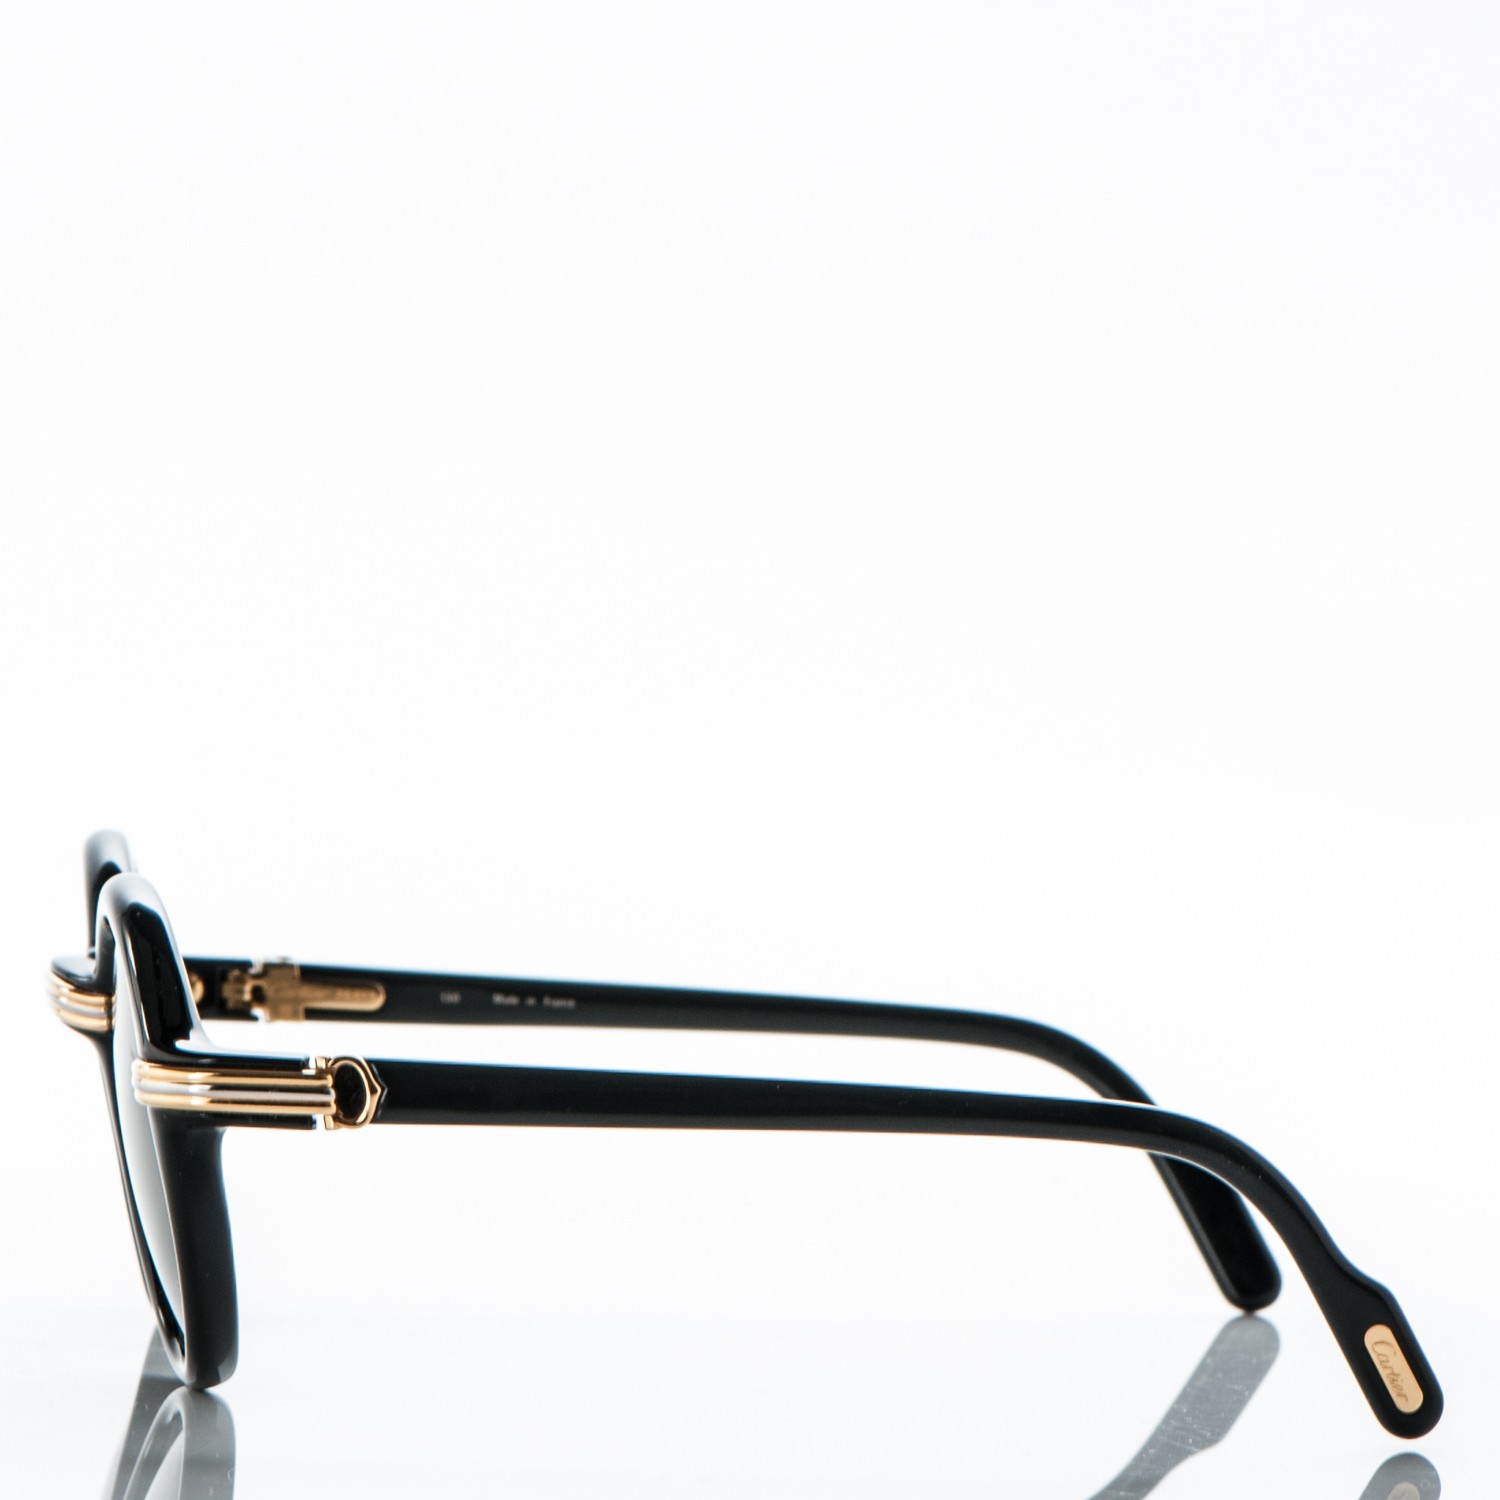 black and gold cartier sunglasses